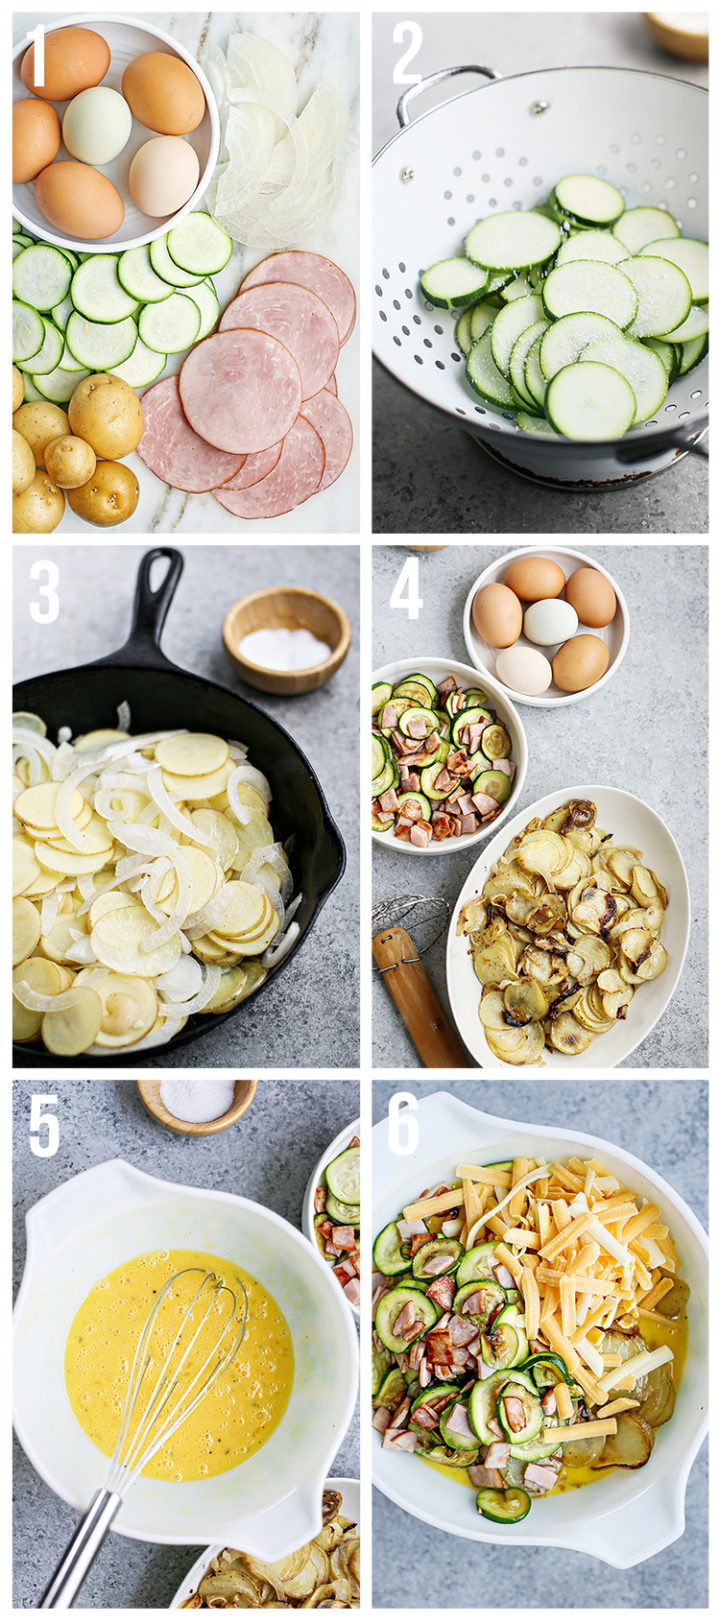 step by step photos showing how to make a frittata for a zucchini frittata recipe